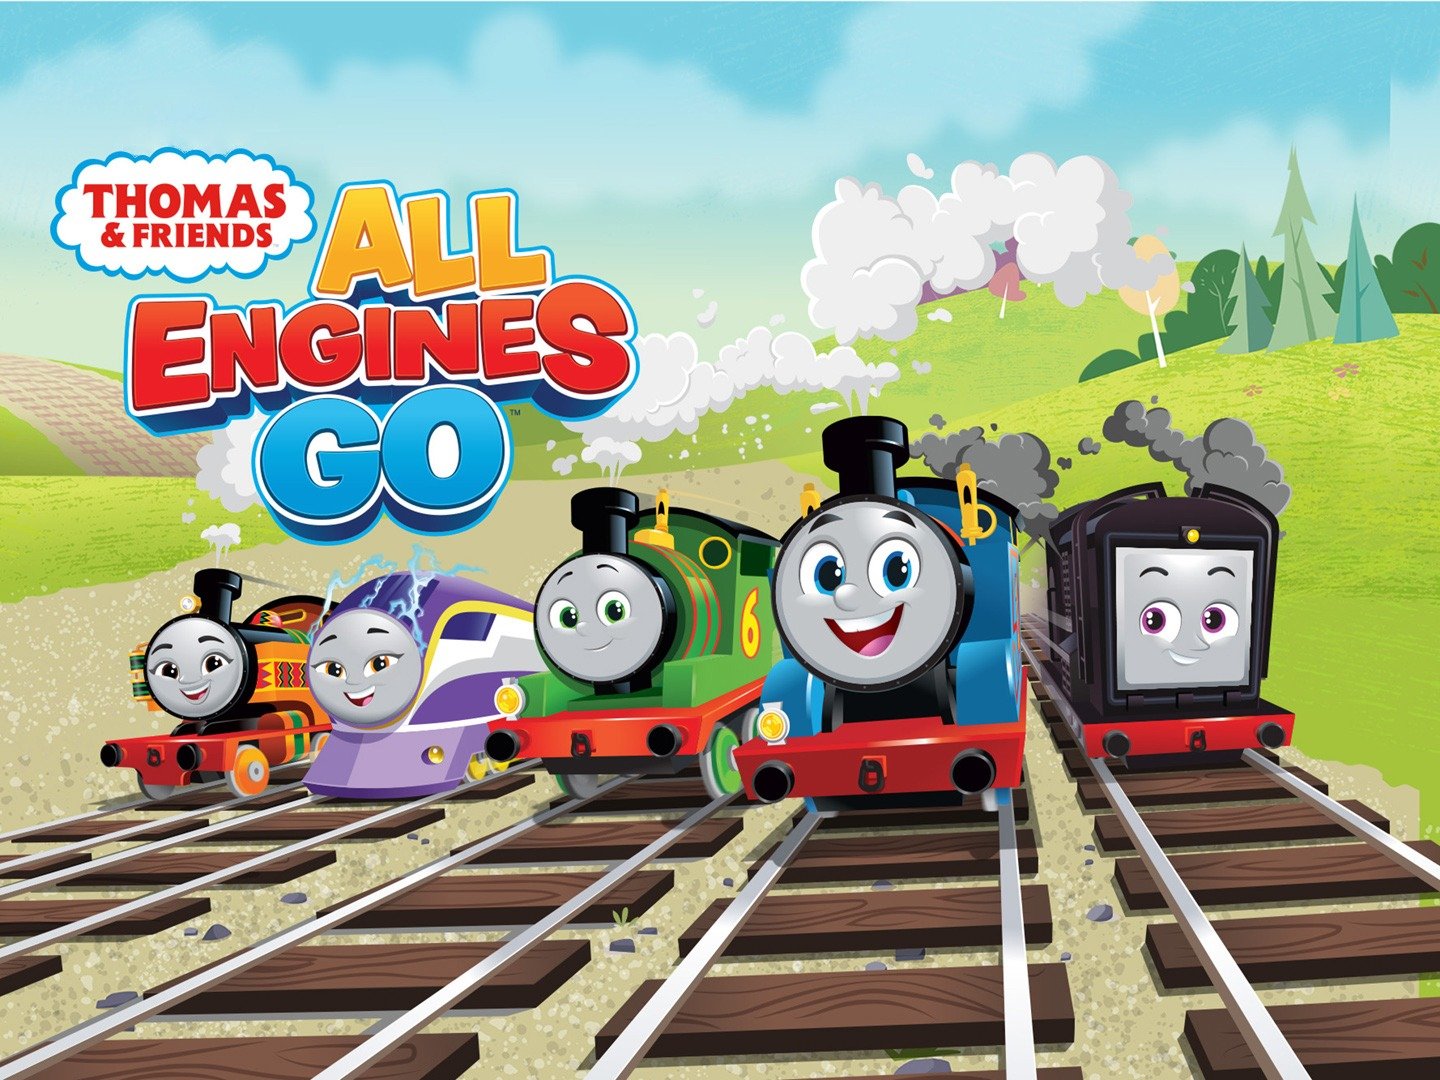 Prime Video: Thomas & Friends: All Engines Go